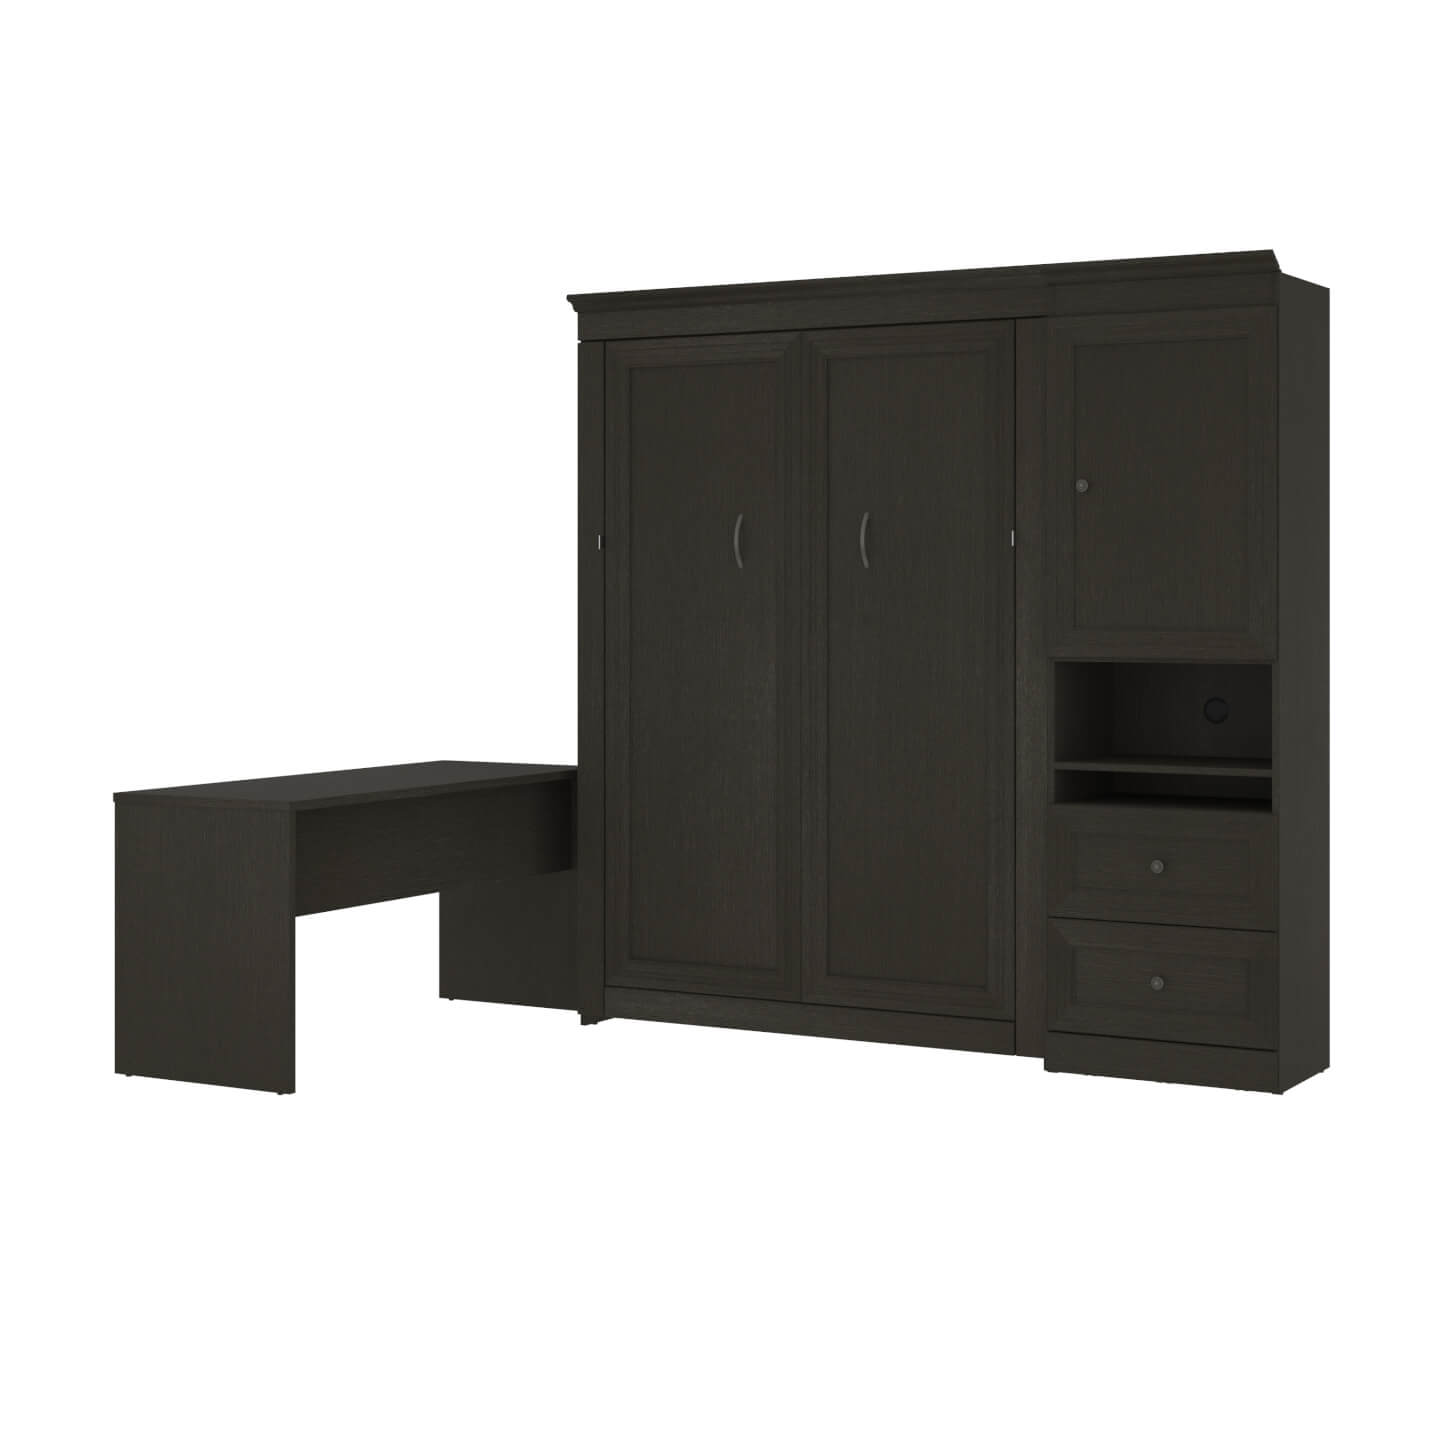 Full Murphy Bed and 1 Storage Unit with Mobile Nightstand and Desk (137”)